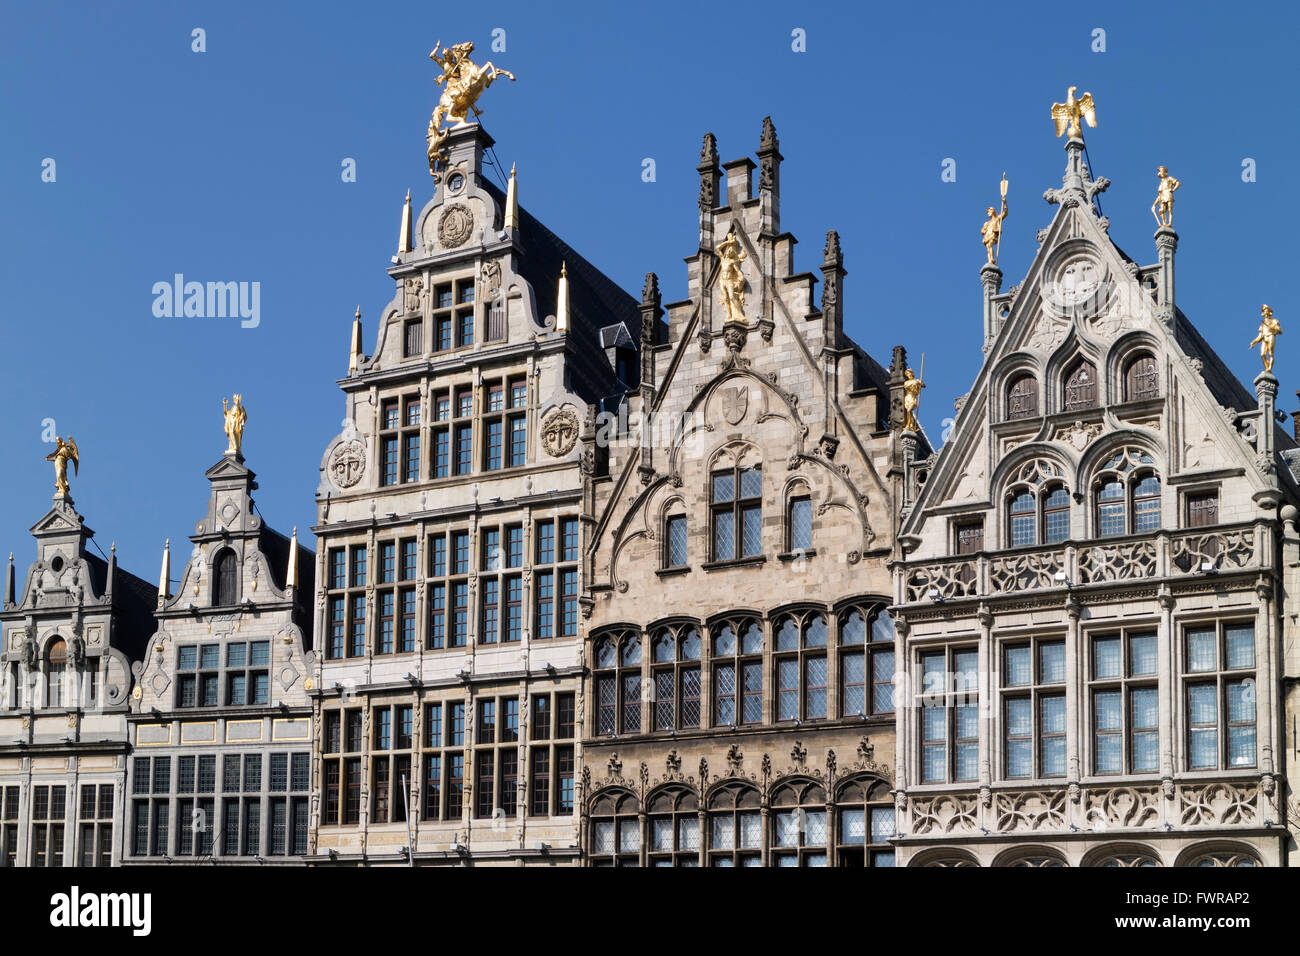 Row of facades of Flemish guild houses on the Grote markt in Antwerp, Belgium Stock Photo